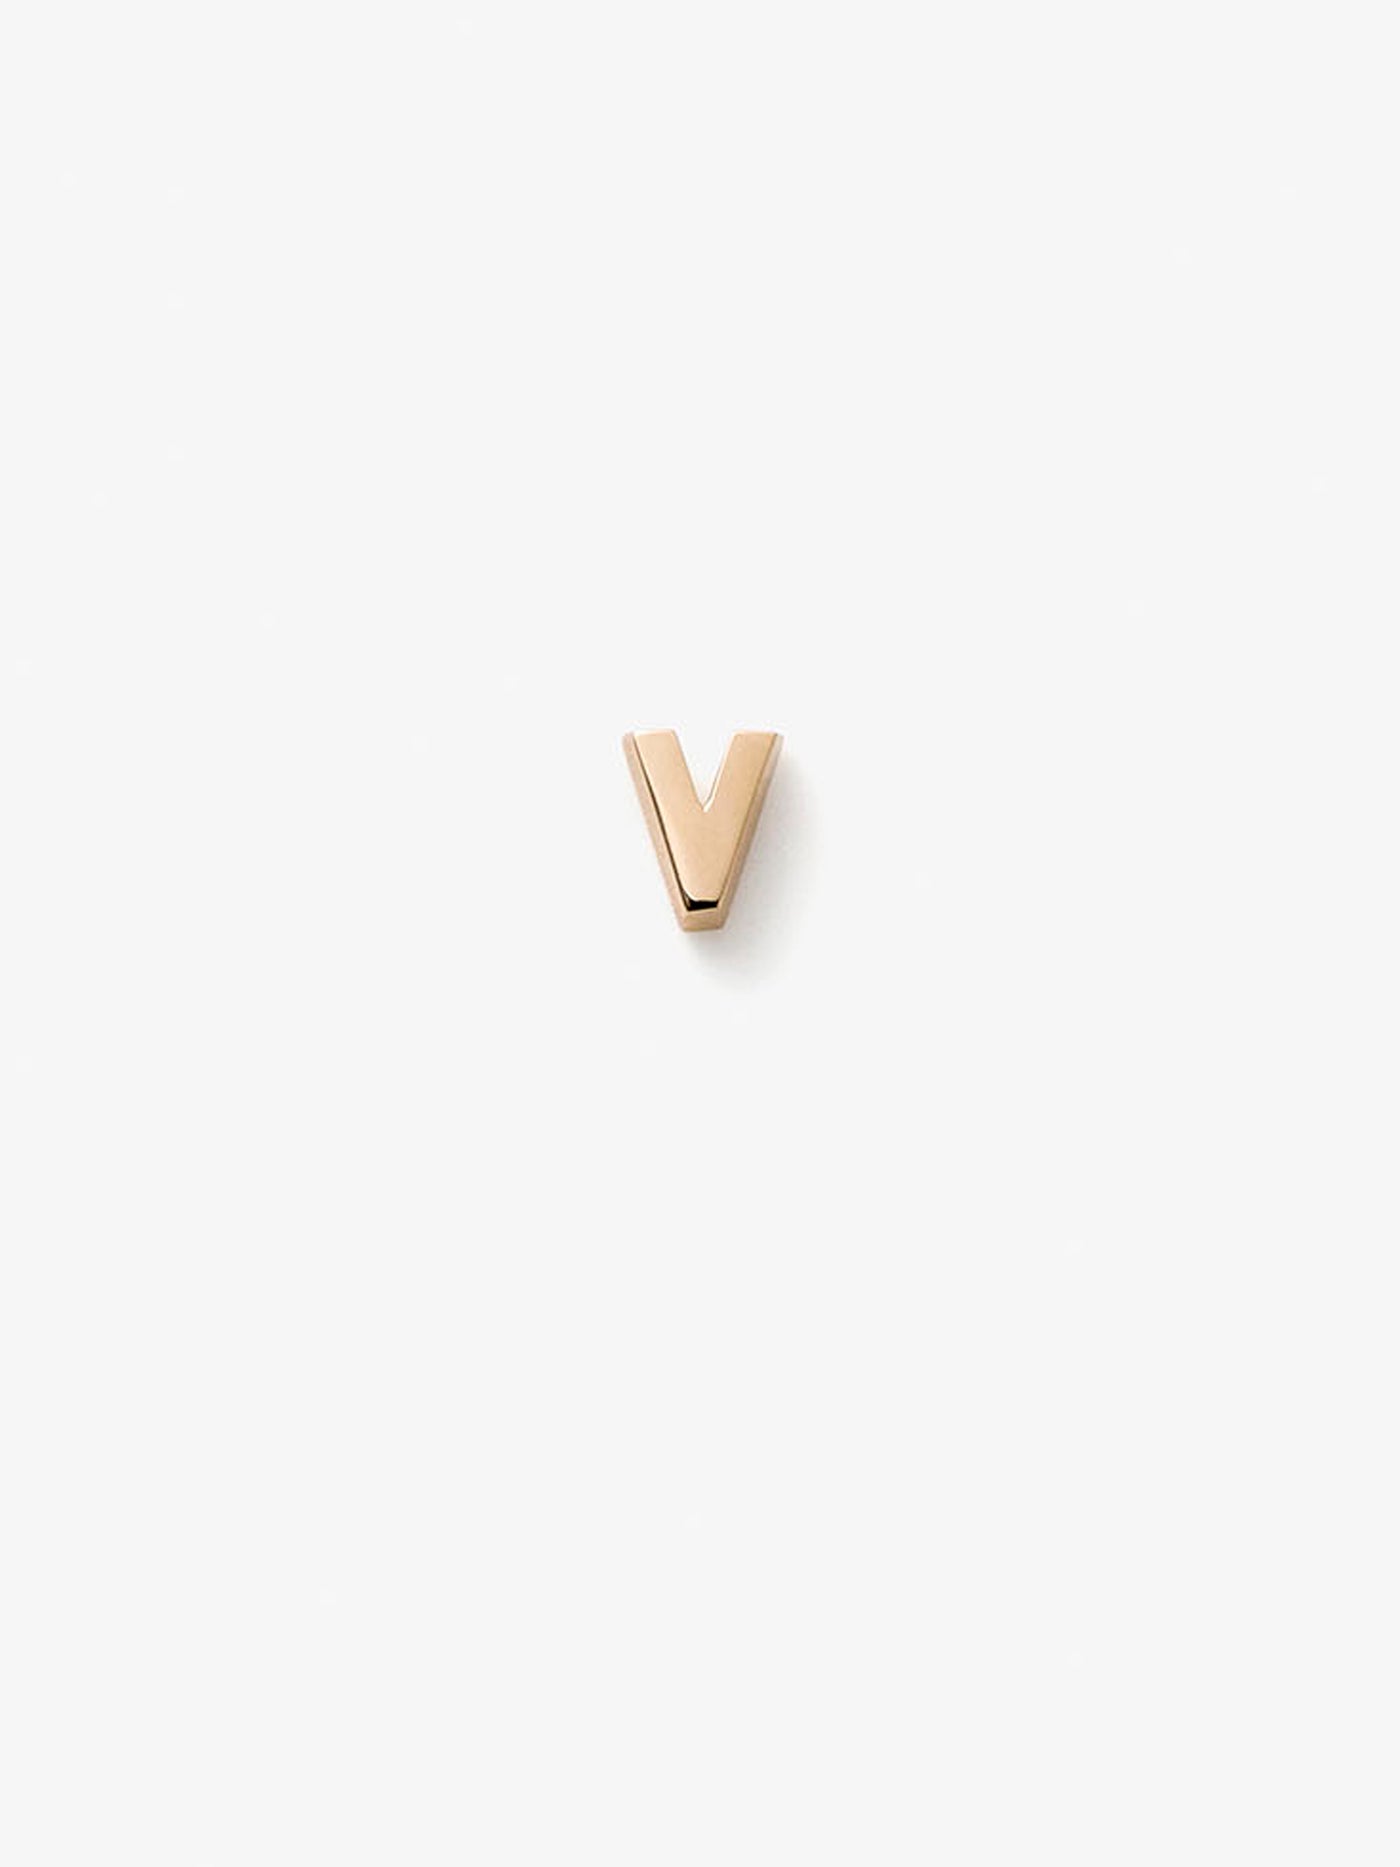 Miniature letter V single stud earring in 18k solid gold with a butterfly fastening for pierced ears